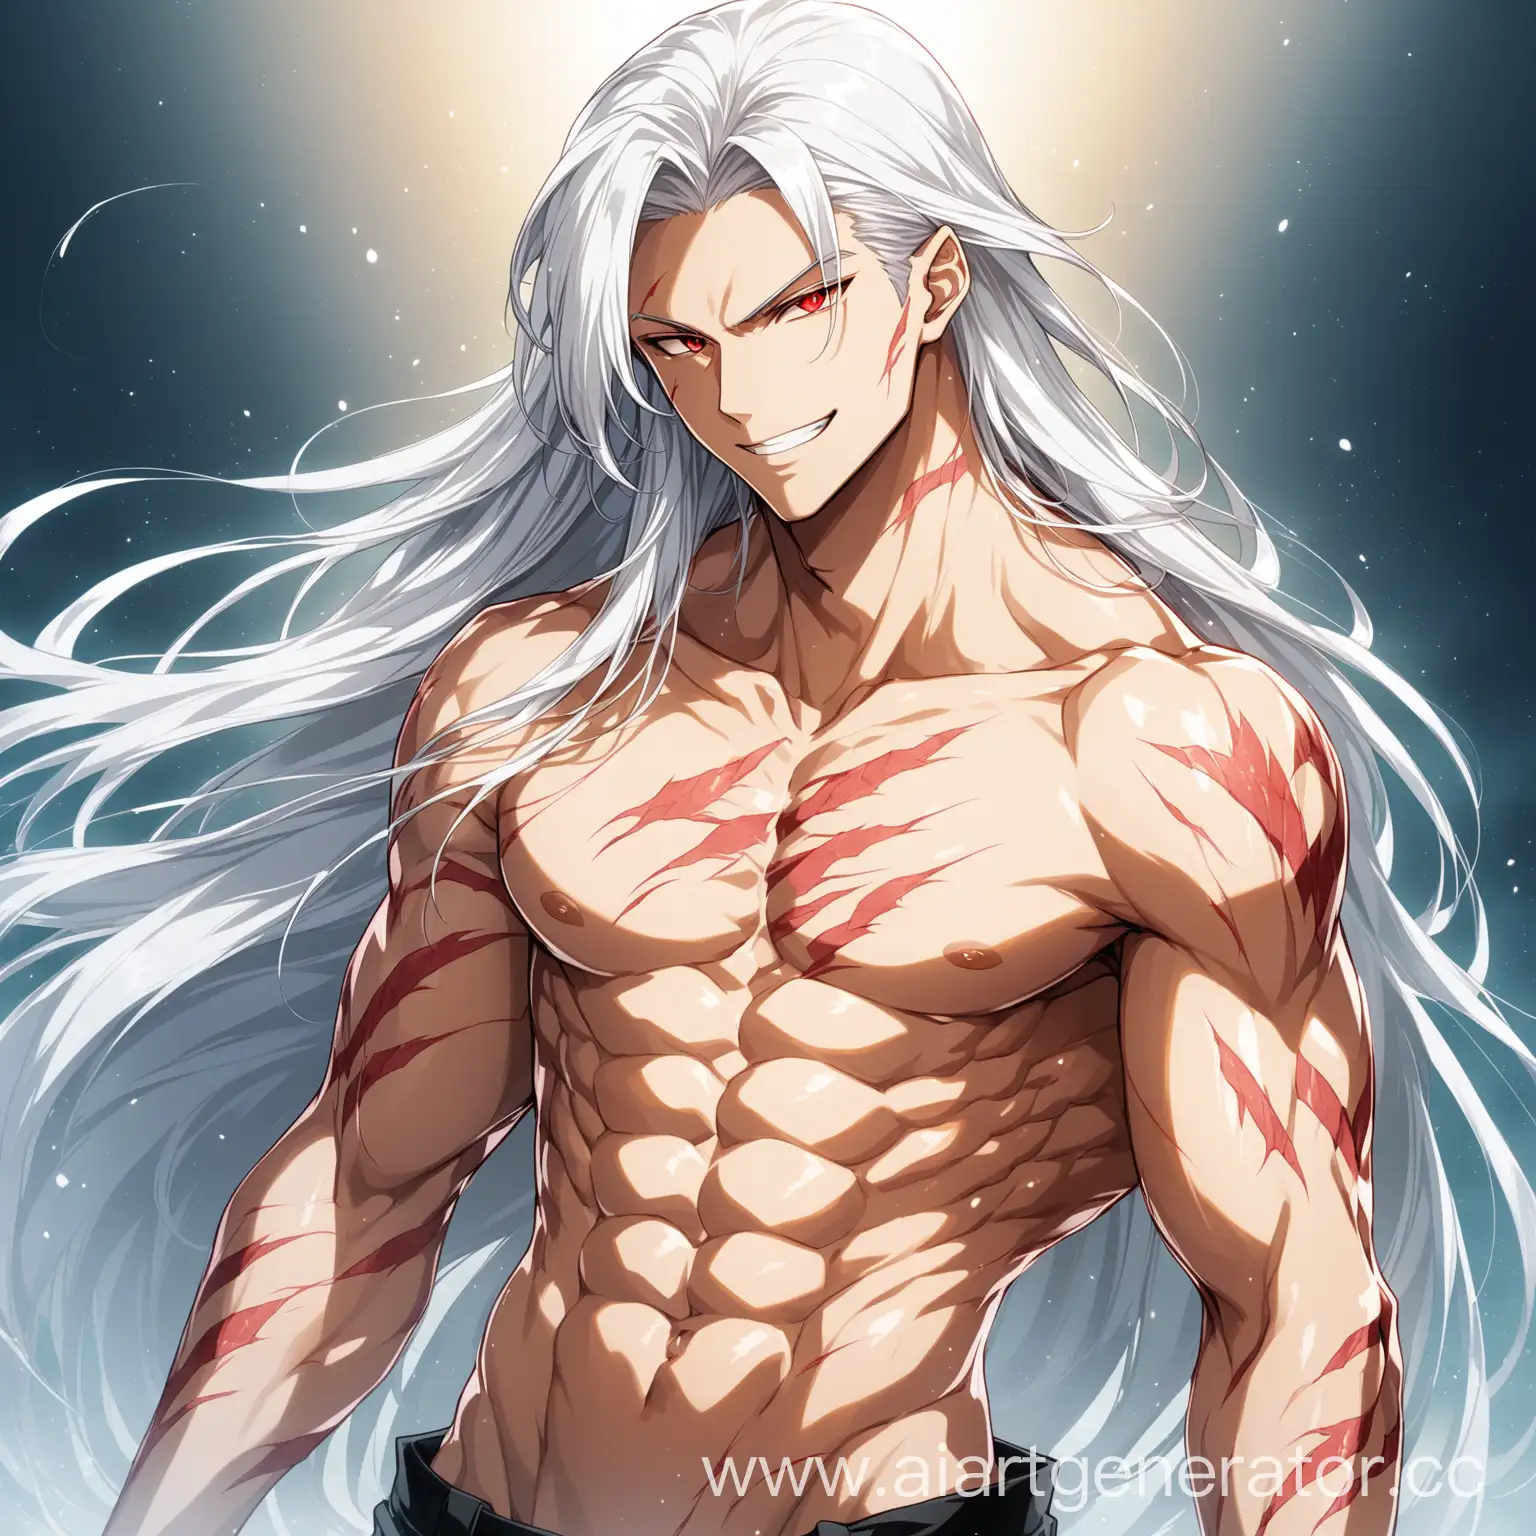 Anime-Boy-with-Crimson-Eyes-and-Silver-Hair-Grinning-Wolfishly